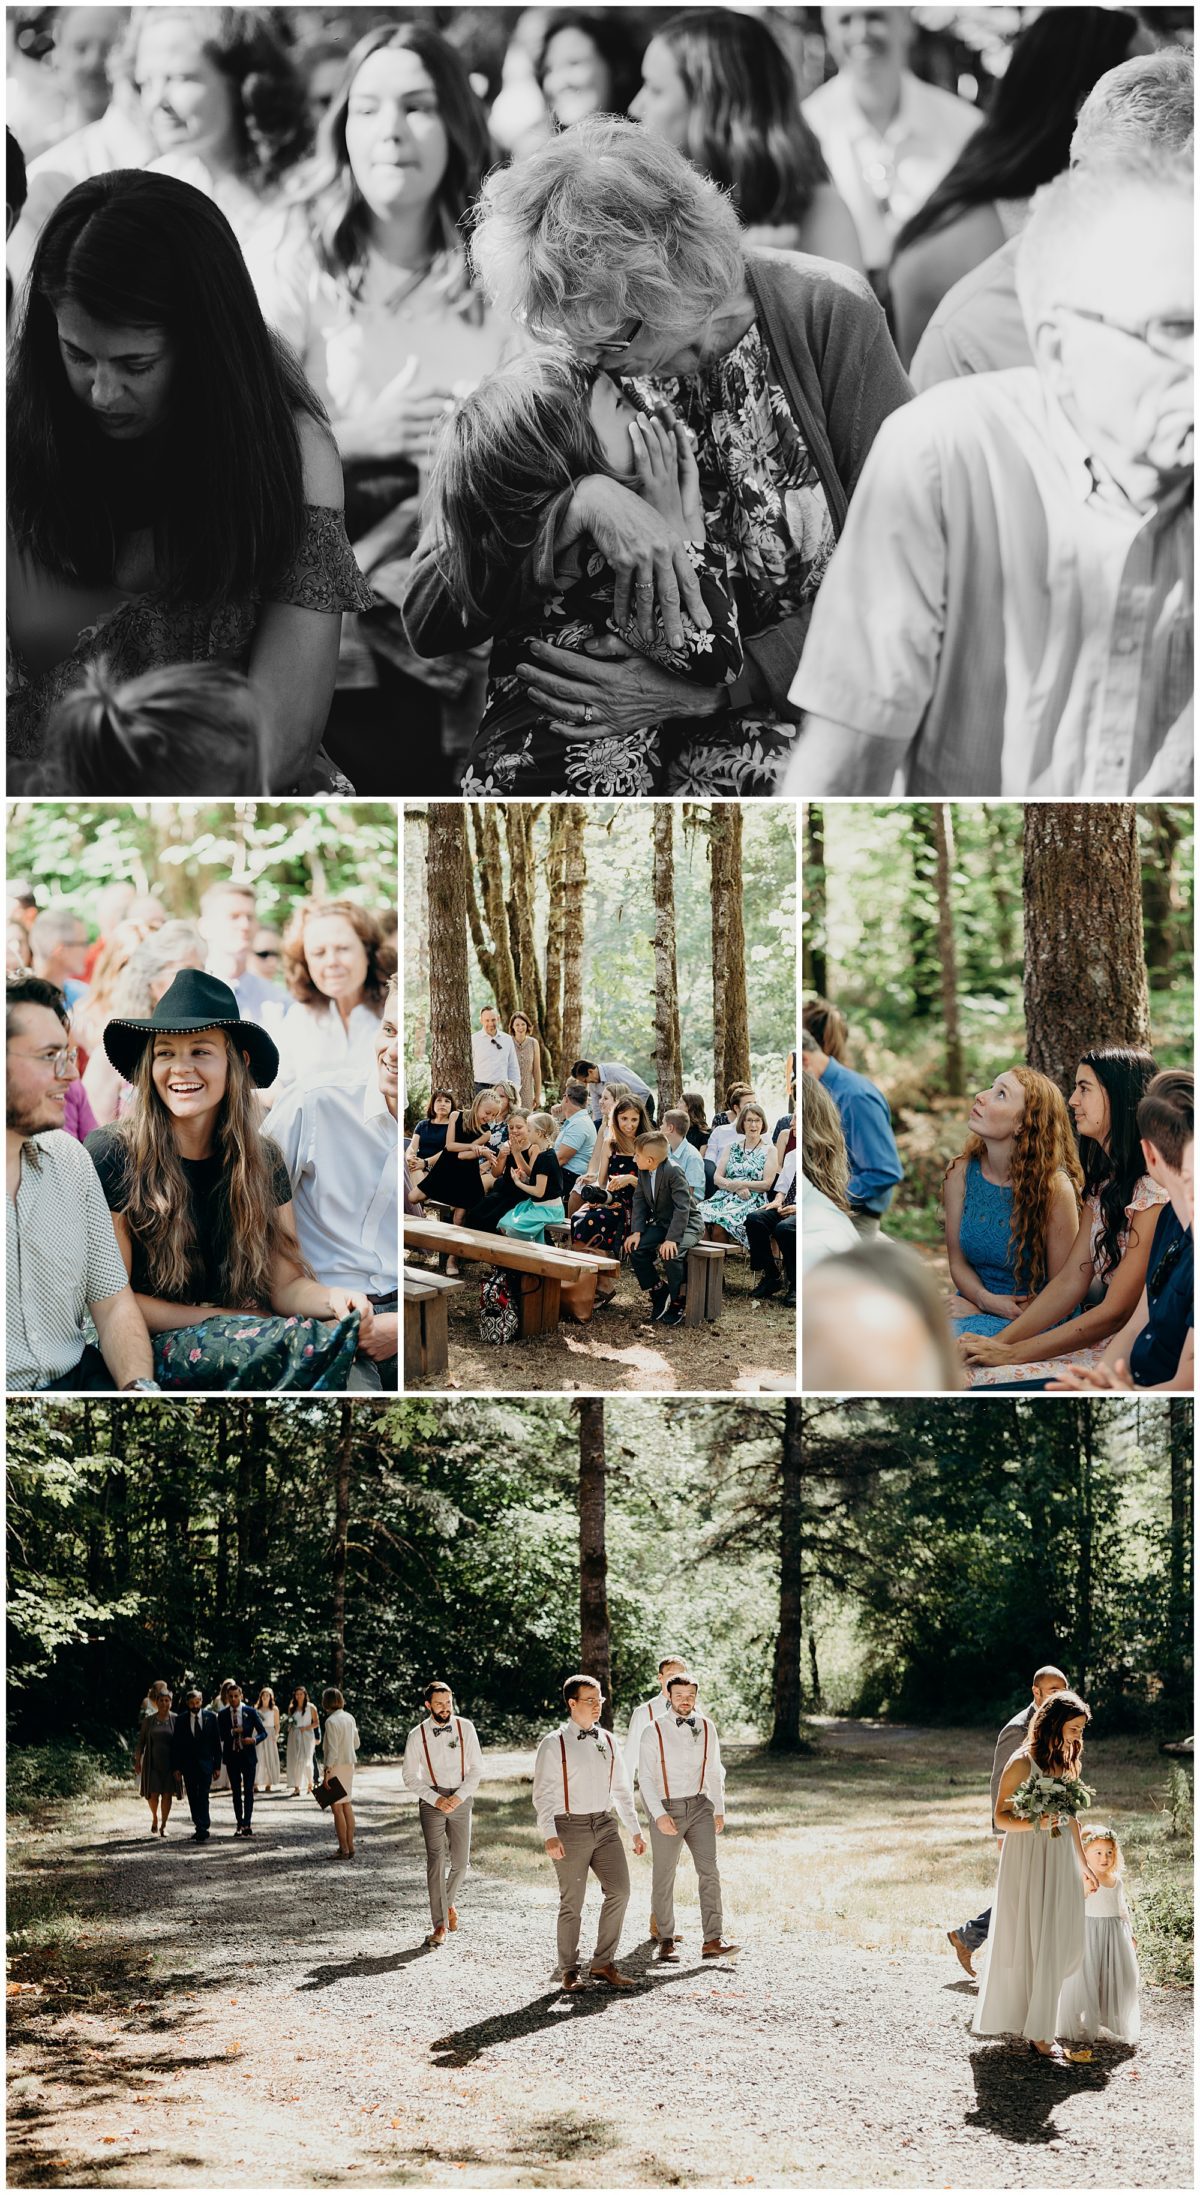 Moments before the ceremony at Camp Cascade. Photography by Portland Wedding photographer, Briana Morrison